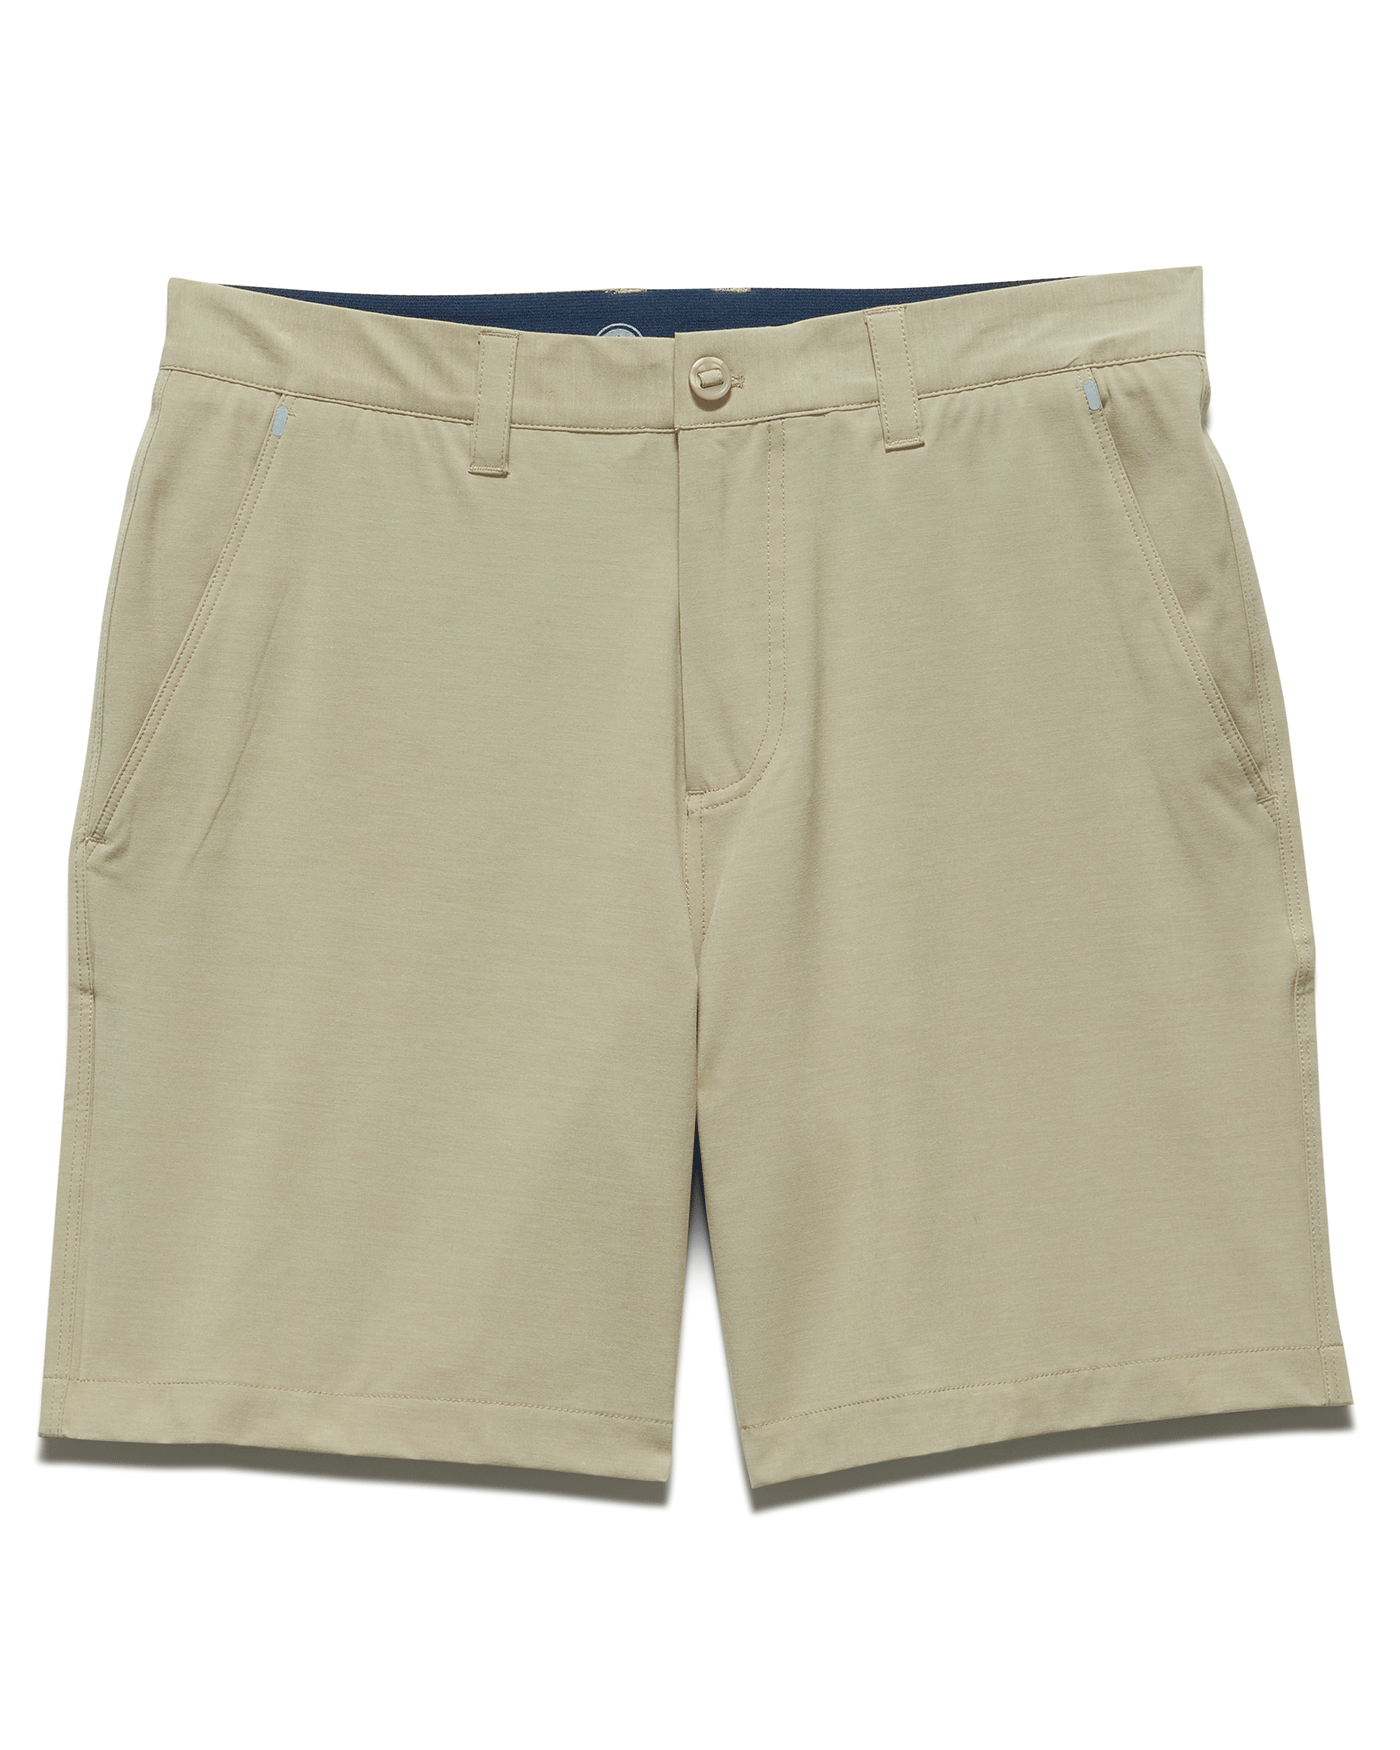 COTTON BLEND ANY-WEAR PERFORMANCE SHORT - 8